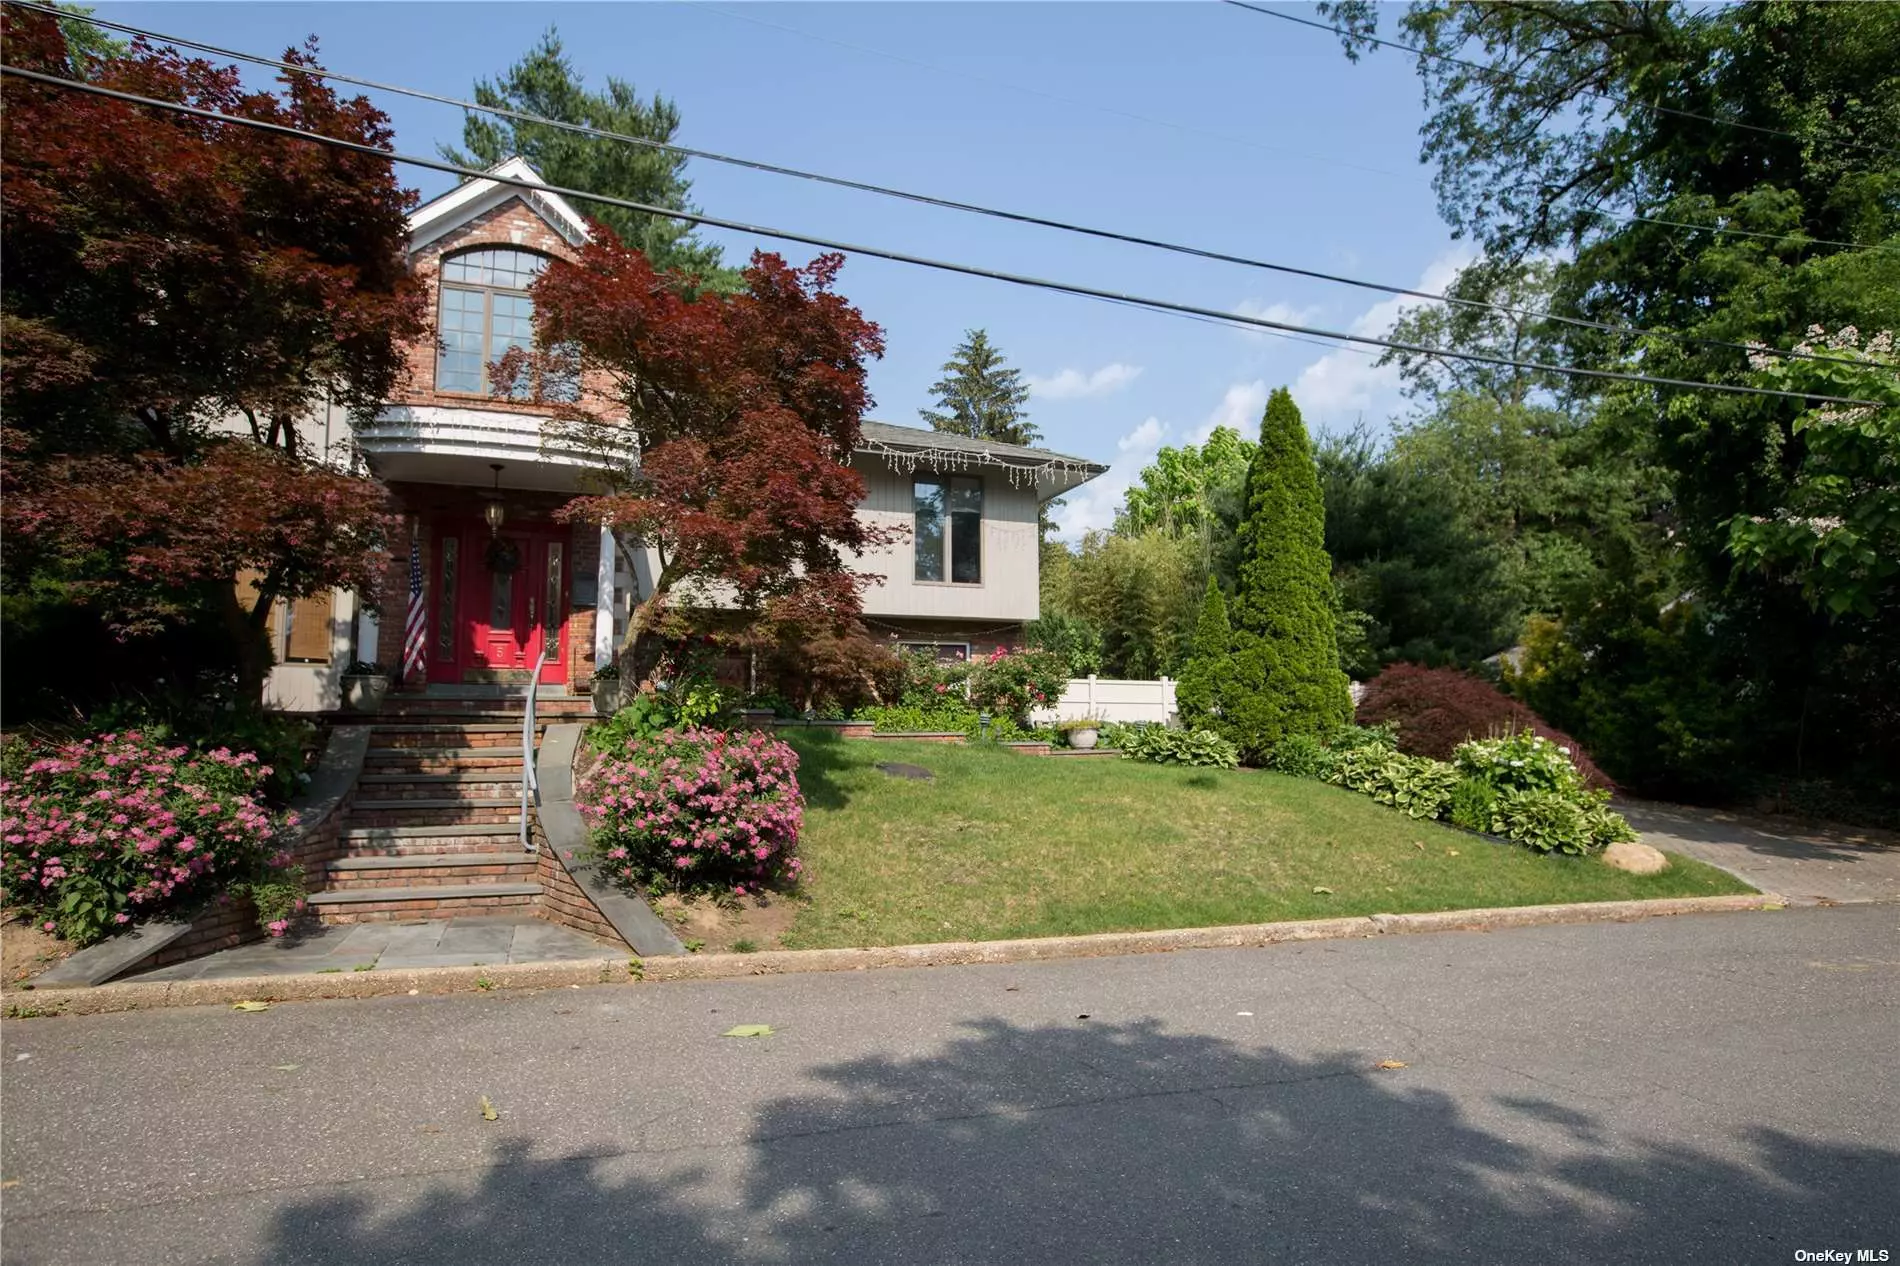 Prime Location in heart of Sea Cliff nestled on a cul de sac location. This home features vaulted ceilings, Gourmet Eat In Kitchen, Dining Room, In Ground pool, Awning, In ground sprinklers, Gas BBQ, Fully Fenced, Shed for storage, Bluestone Patio.